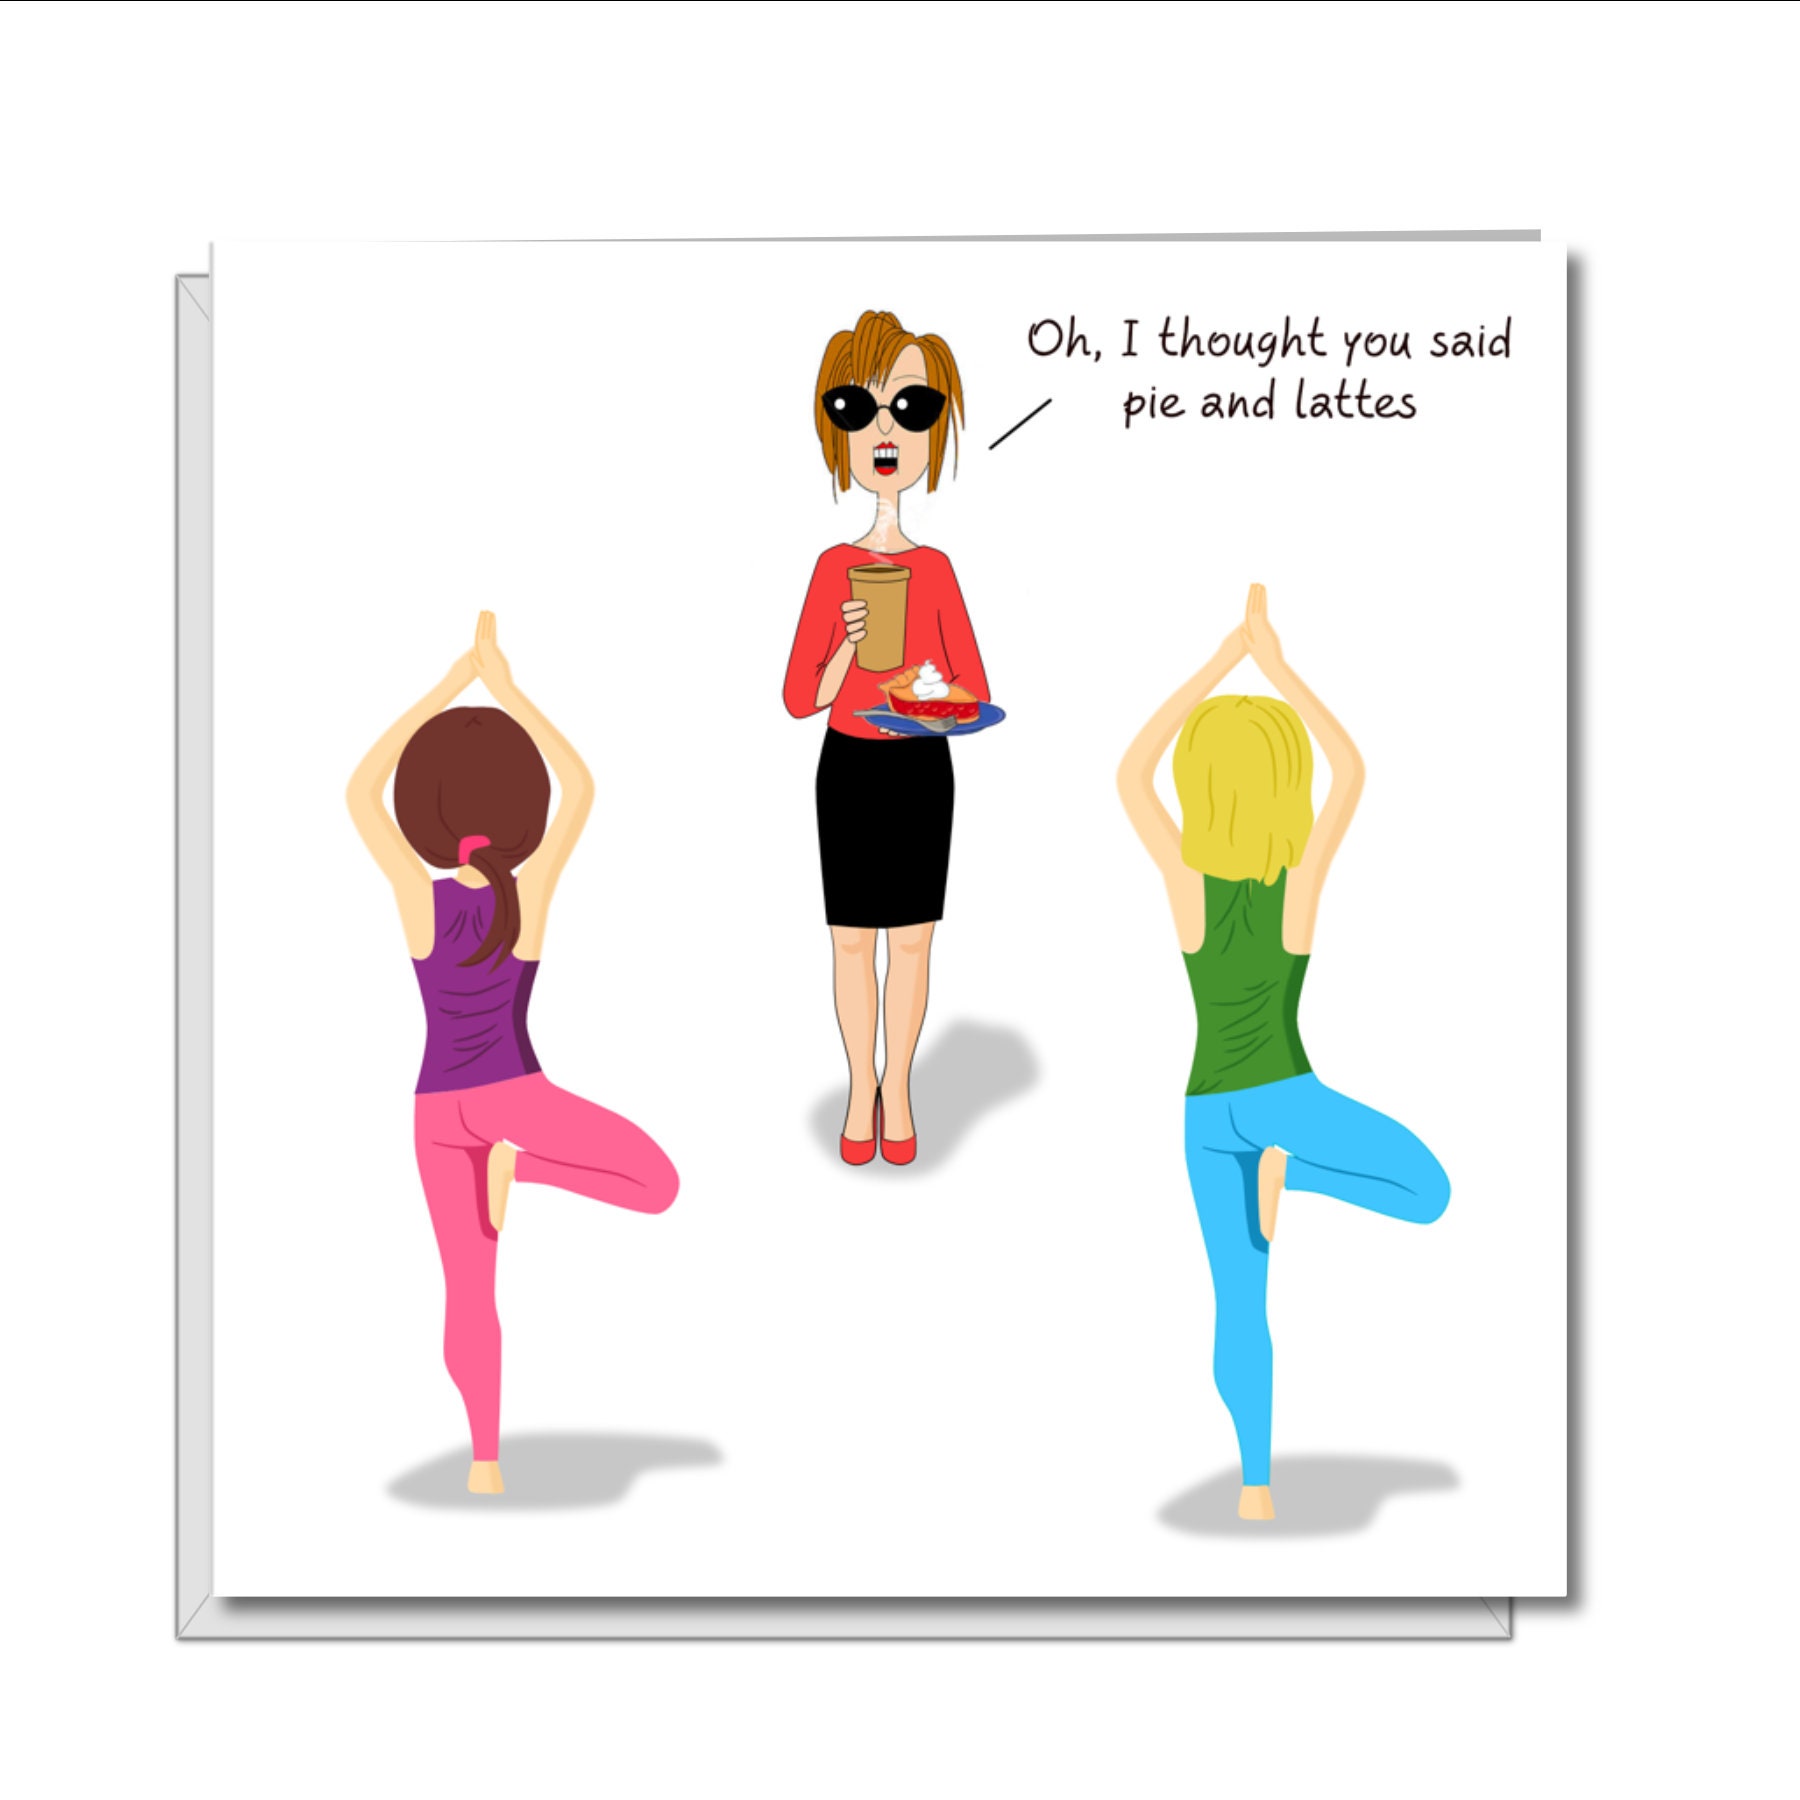 pilates images funny